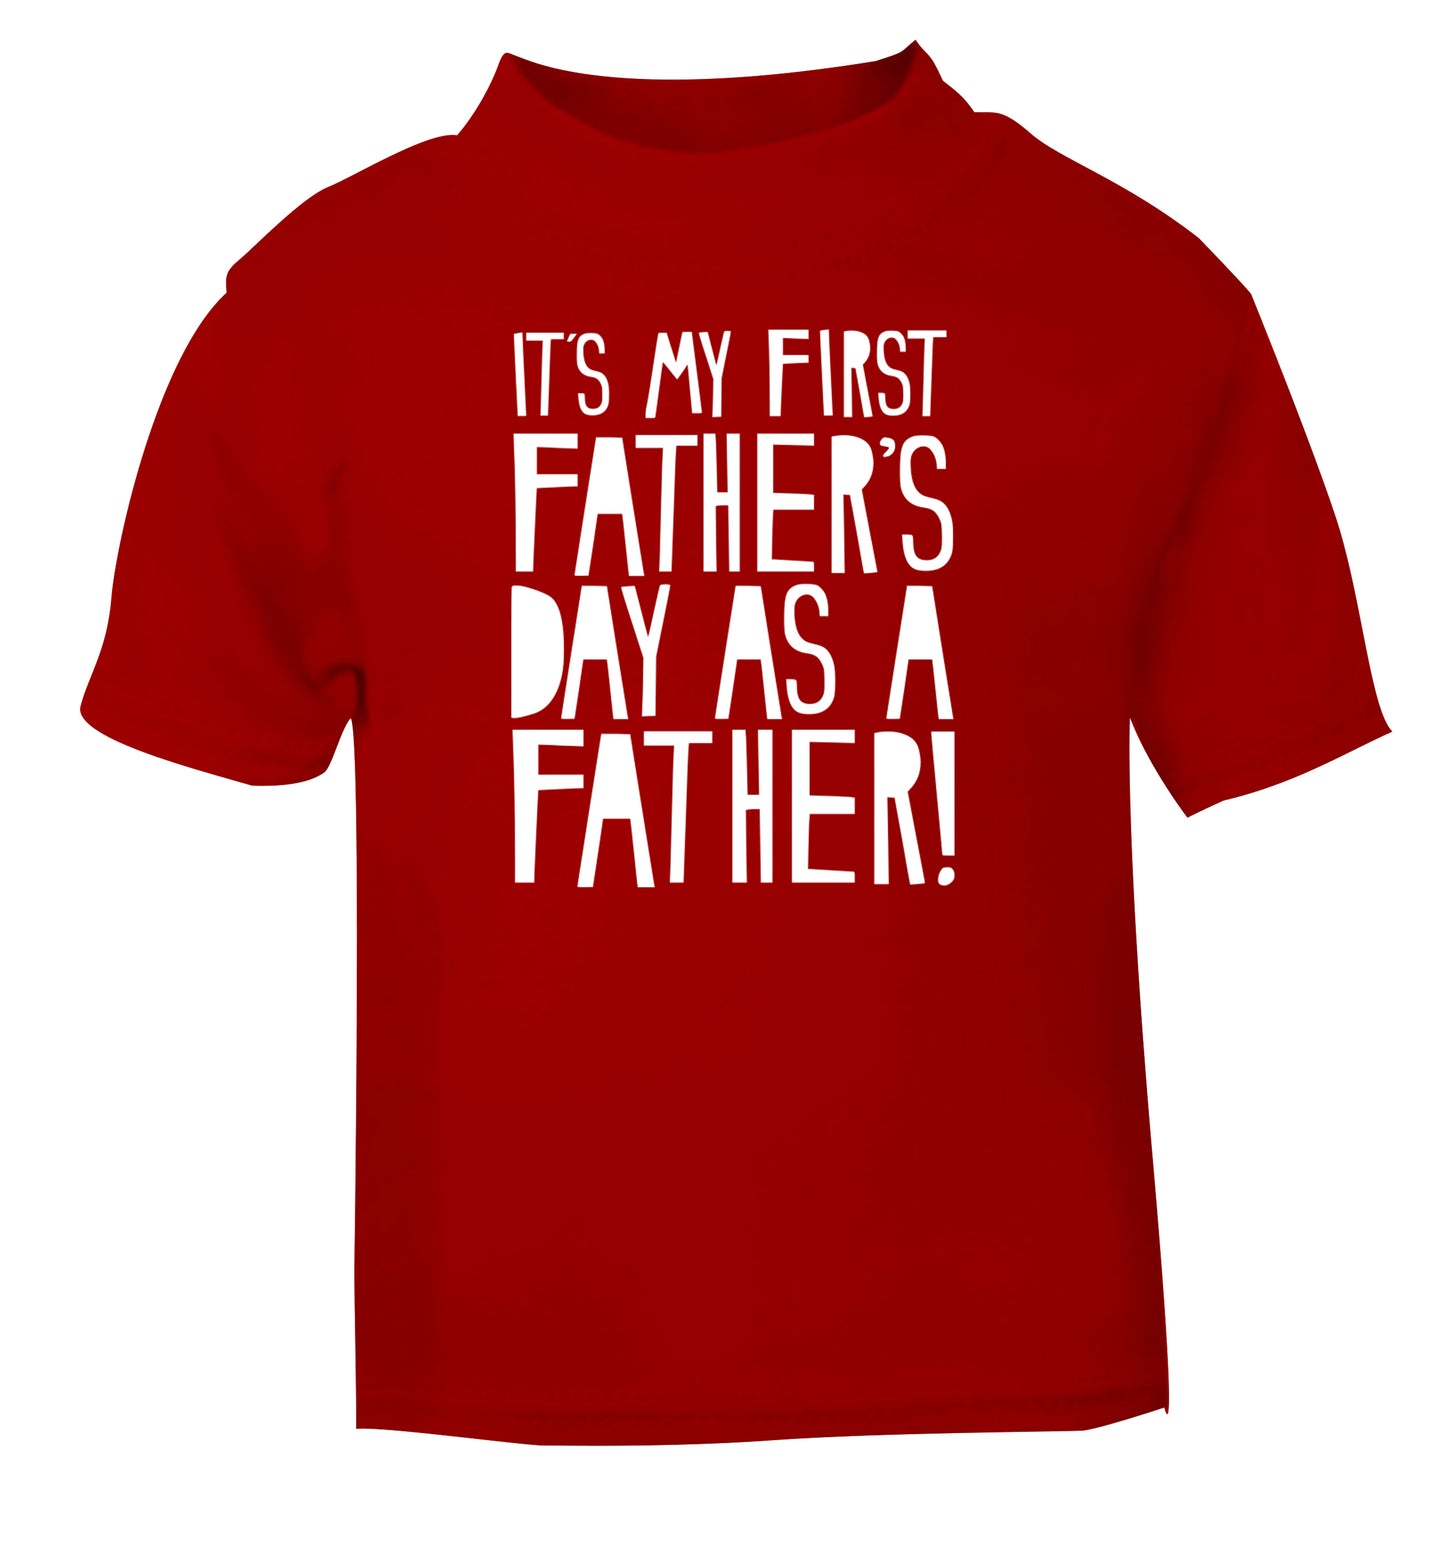 It's my first Father's Day as a father! red Baby Toddler Tshirt 2 Years